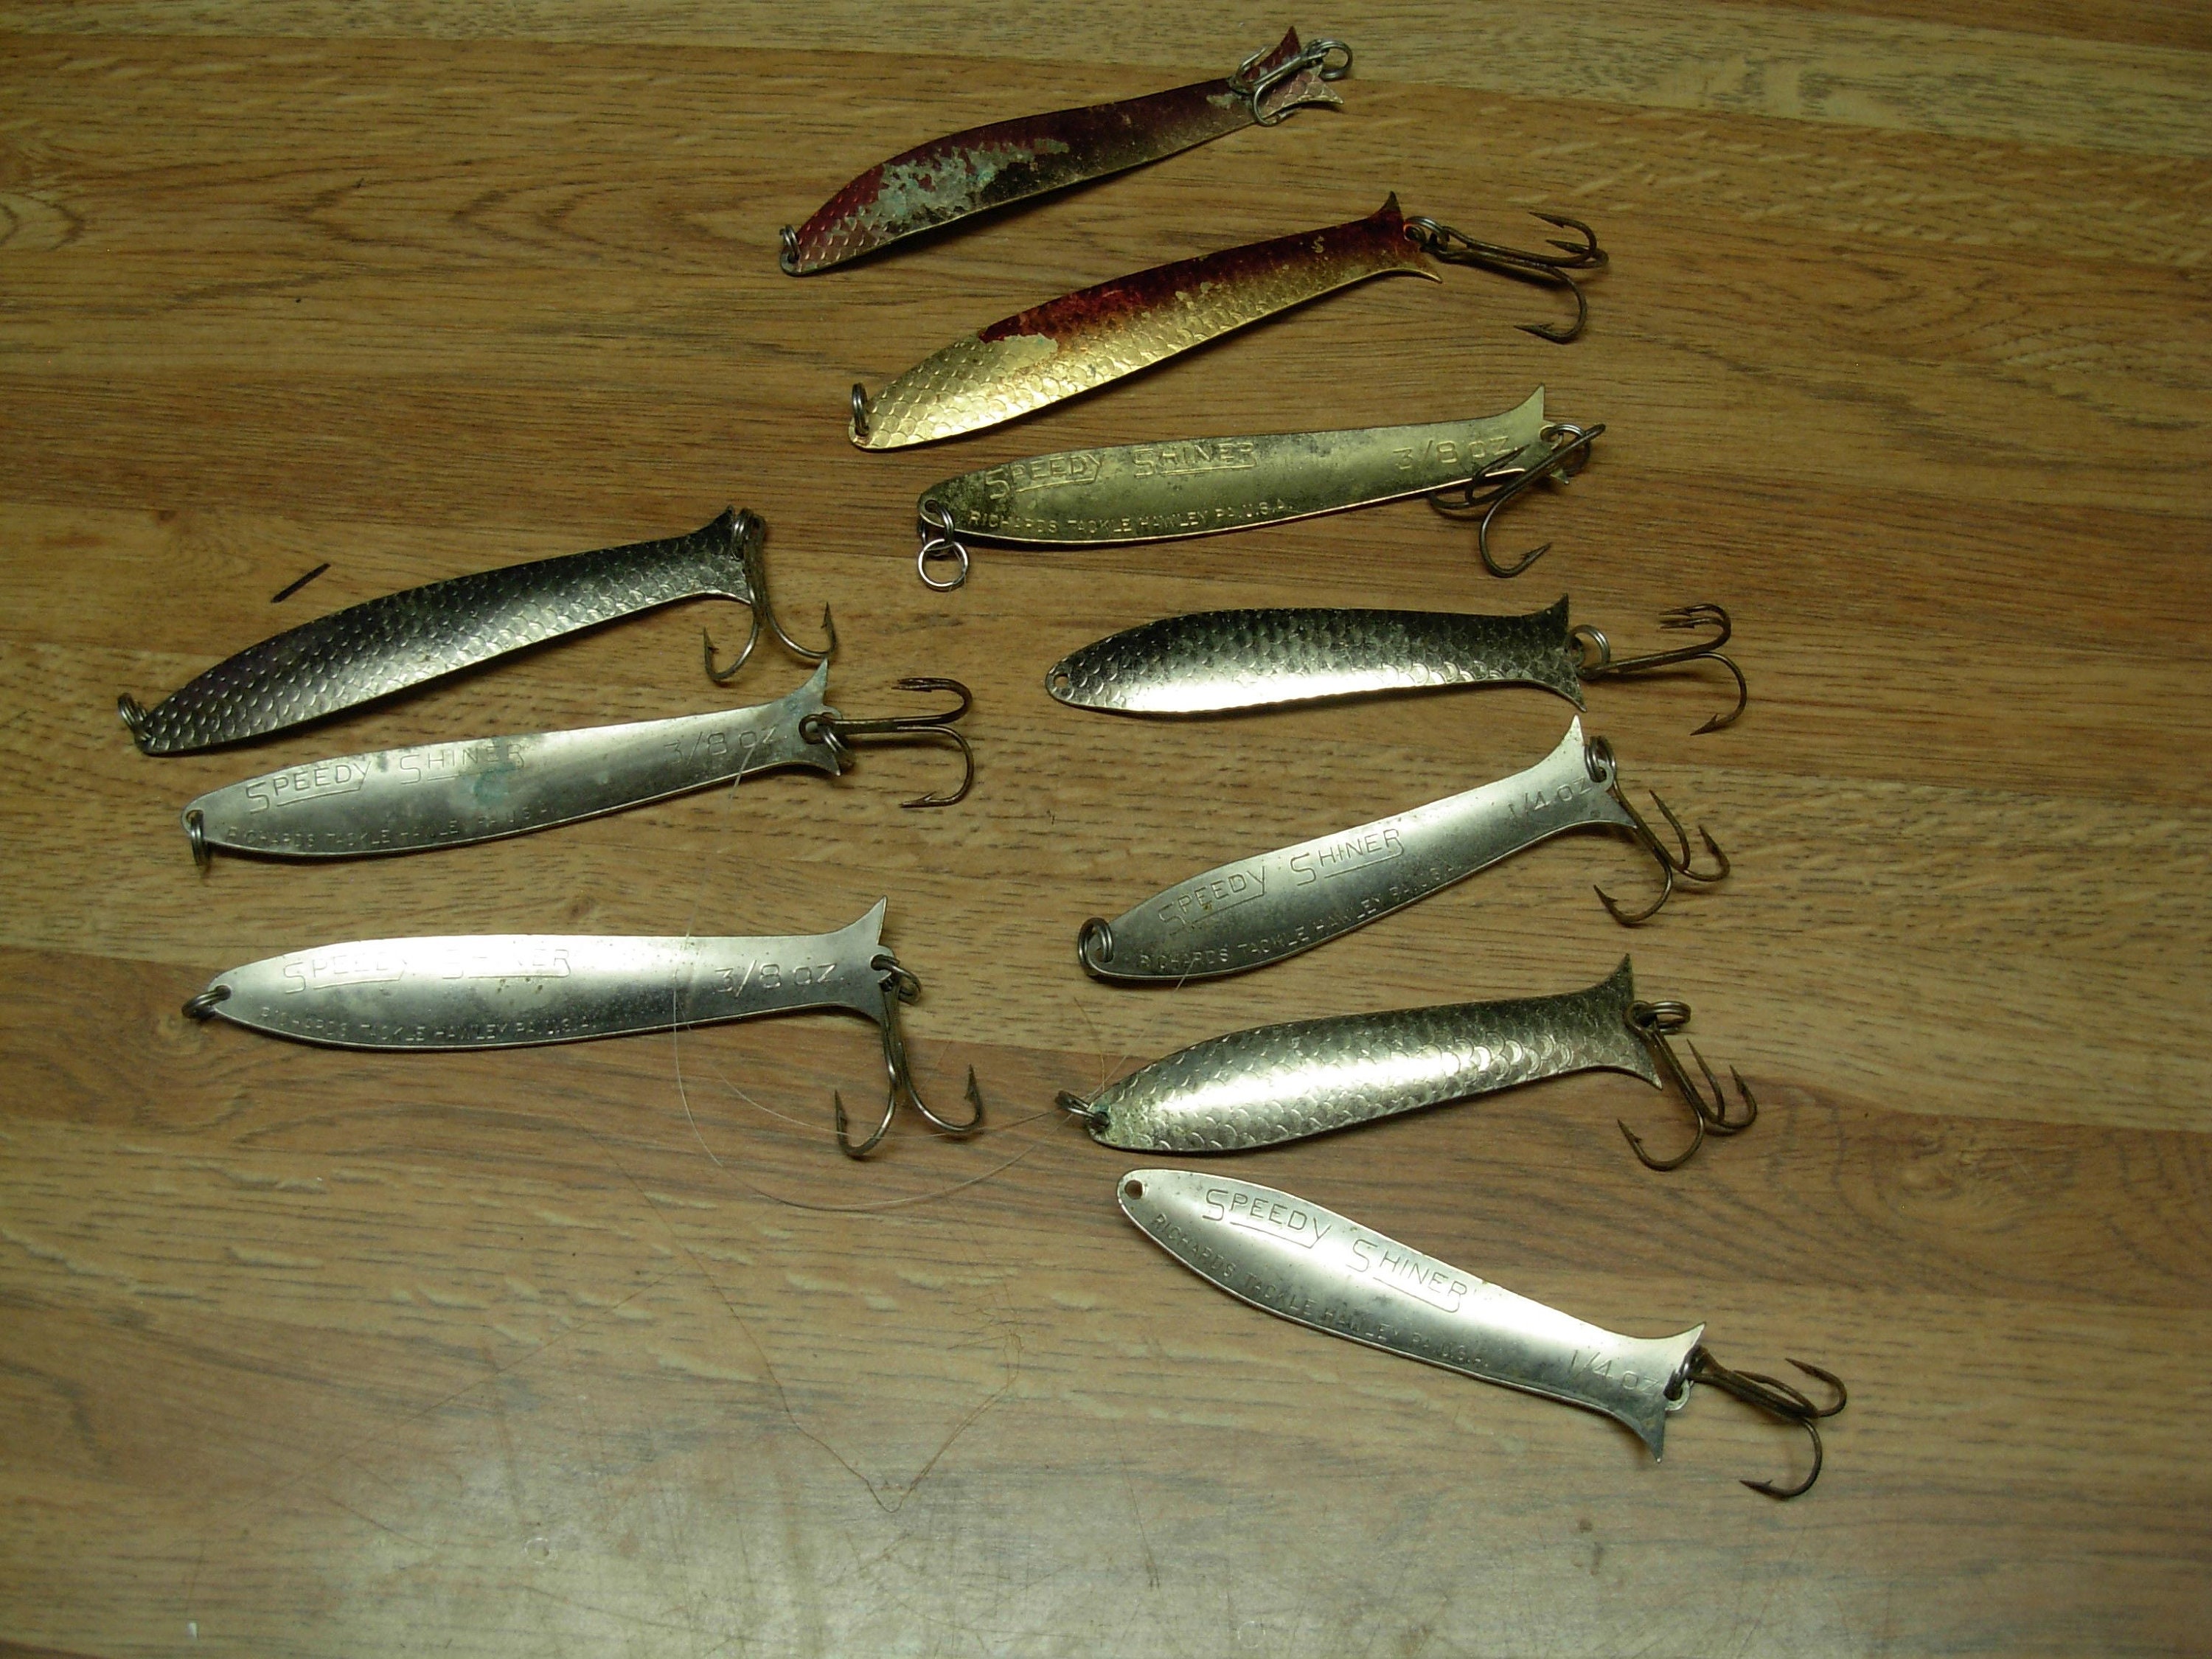 Vintage Fishing Tacke Speedy Shiner Spoon Lures From Richard's